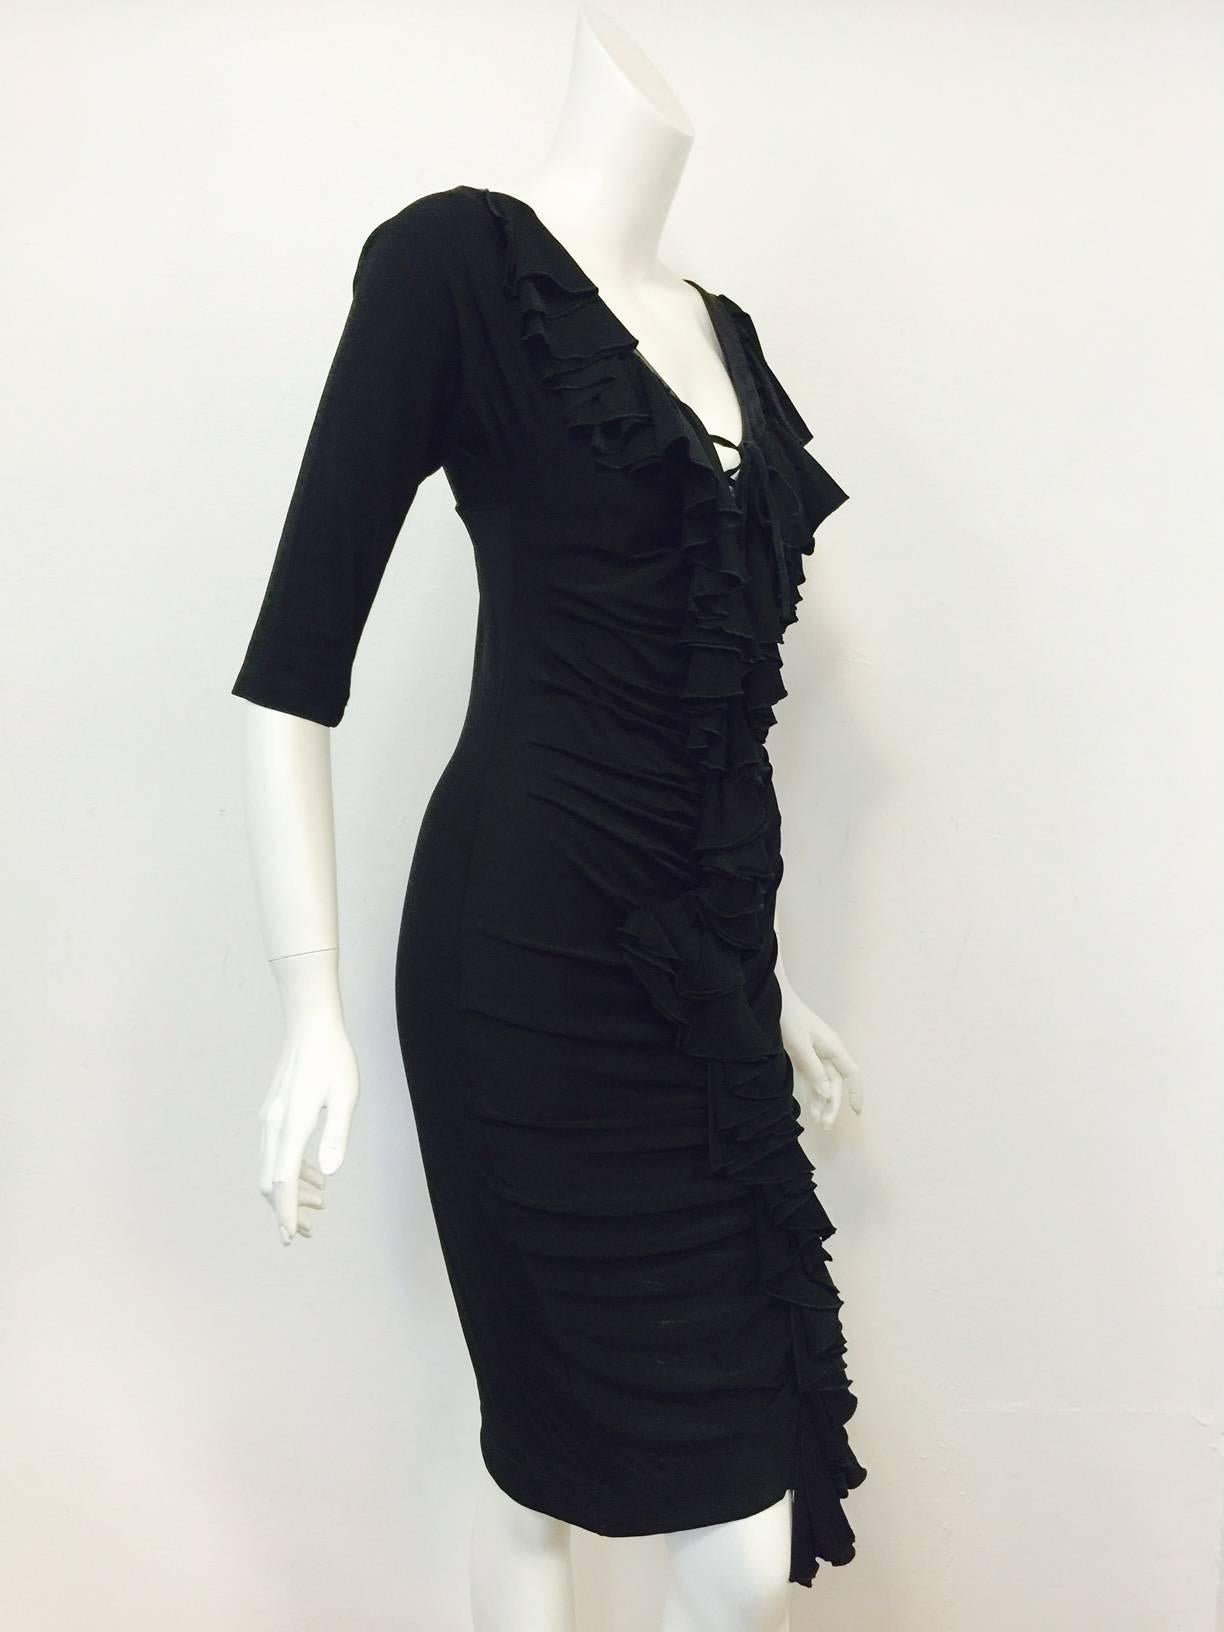 Black Viscose Ruched Sheath Dress is typically Roberto Cavalli! Body conscious? Of course! Knee-length design features luxurious black stretch fabric, elbow length dolman sleeves and ruched front from V-neckline to hem.  Over the top?  Not quite